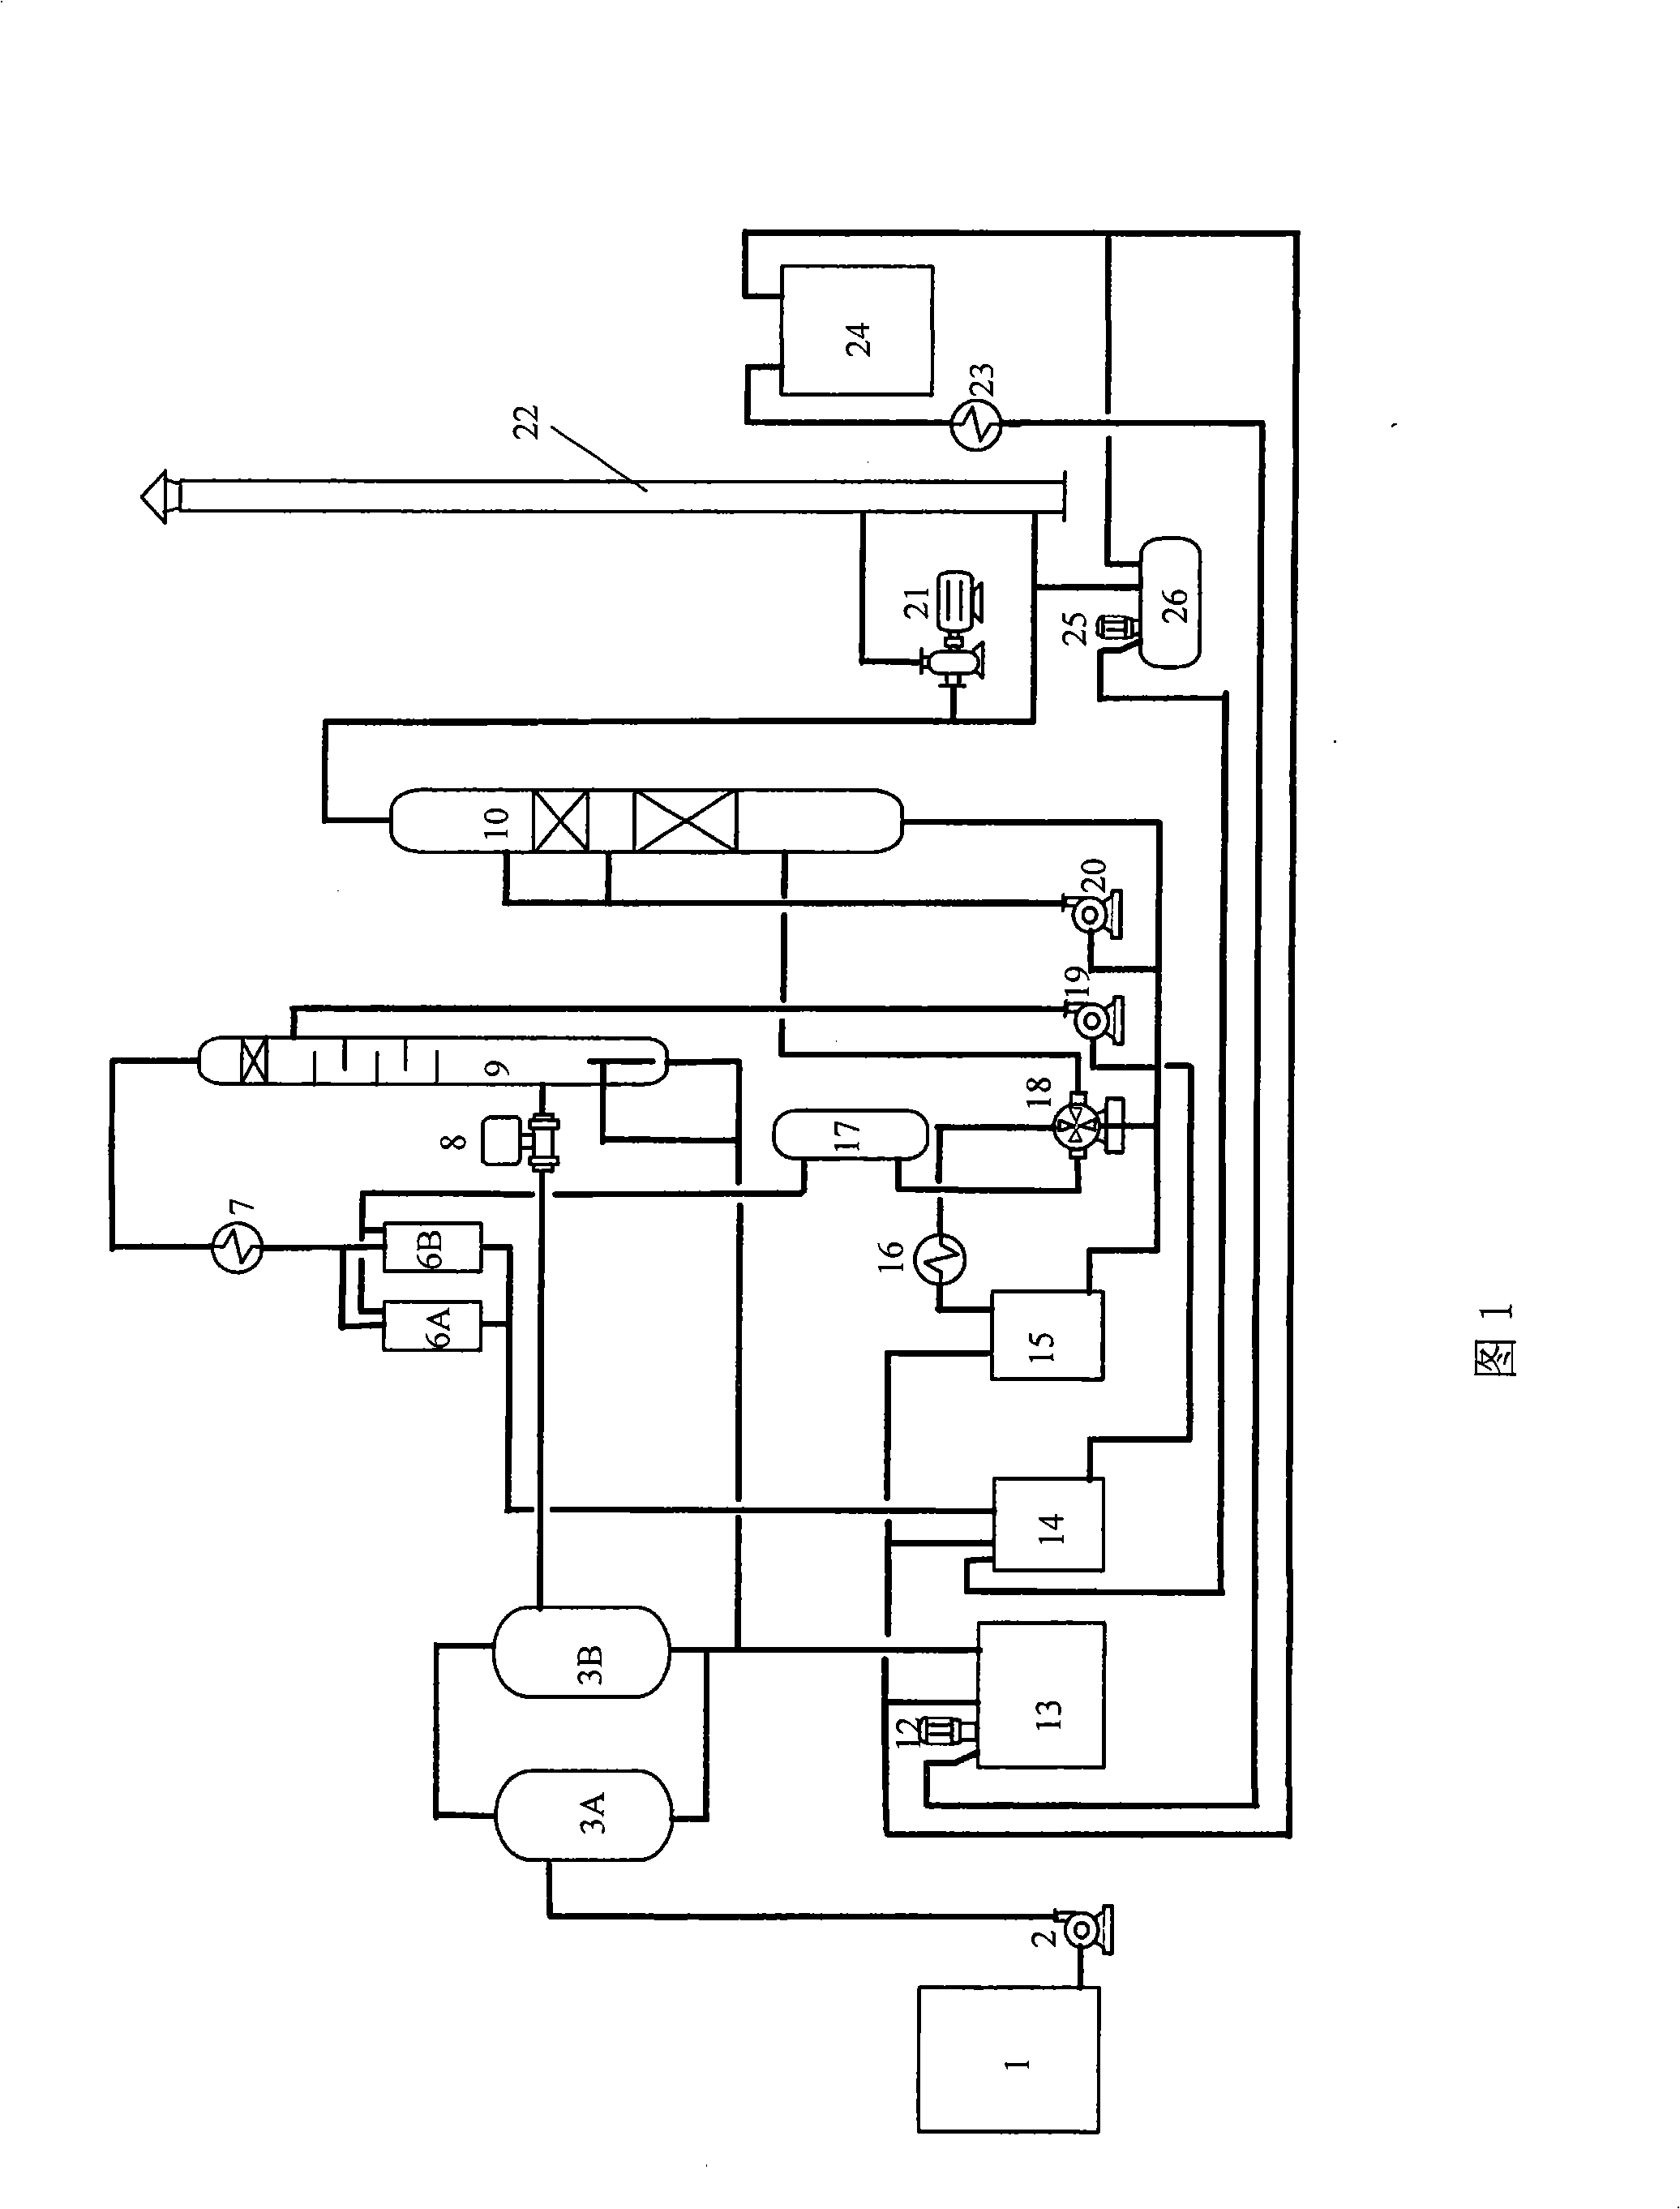 Process for producing moderate temperature modified bitumen by continuously pressurizing and hot-polymerizing at two stages connected in series